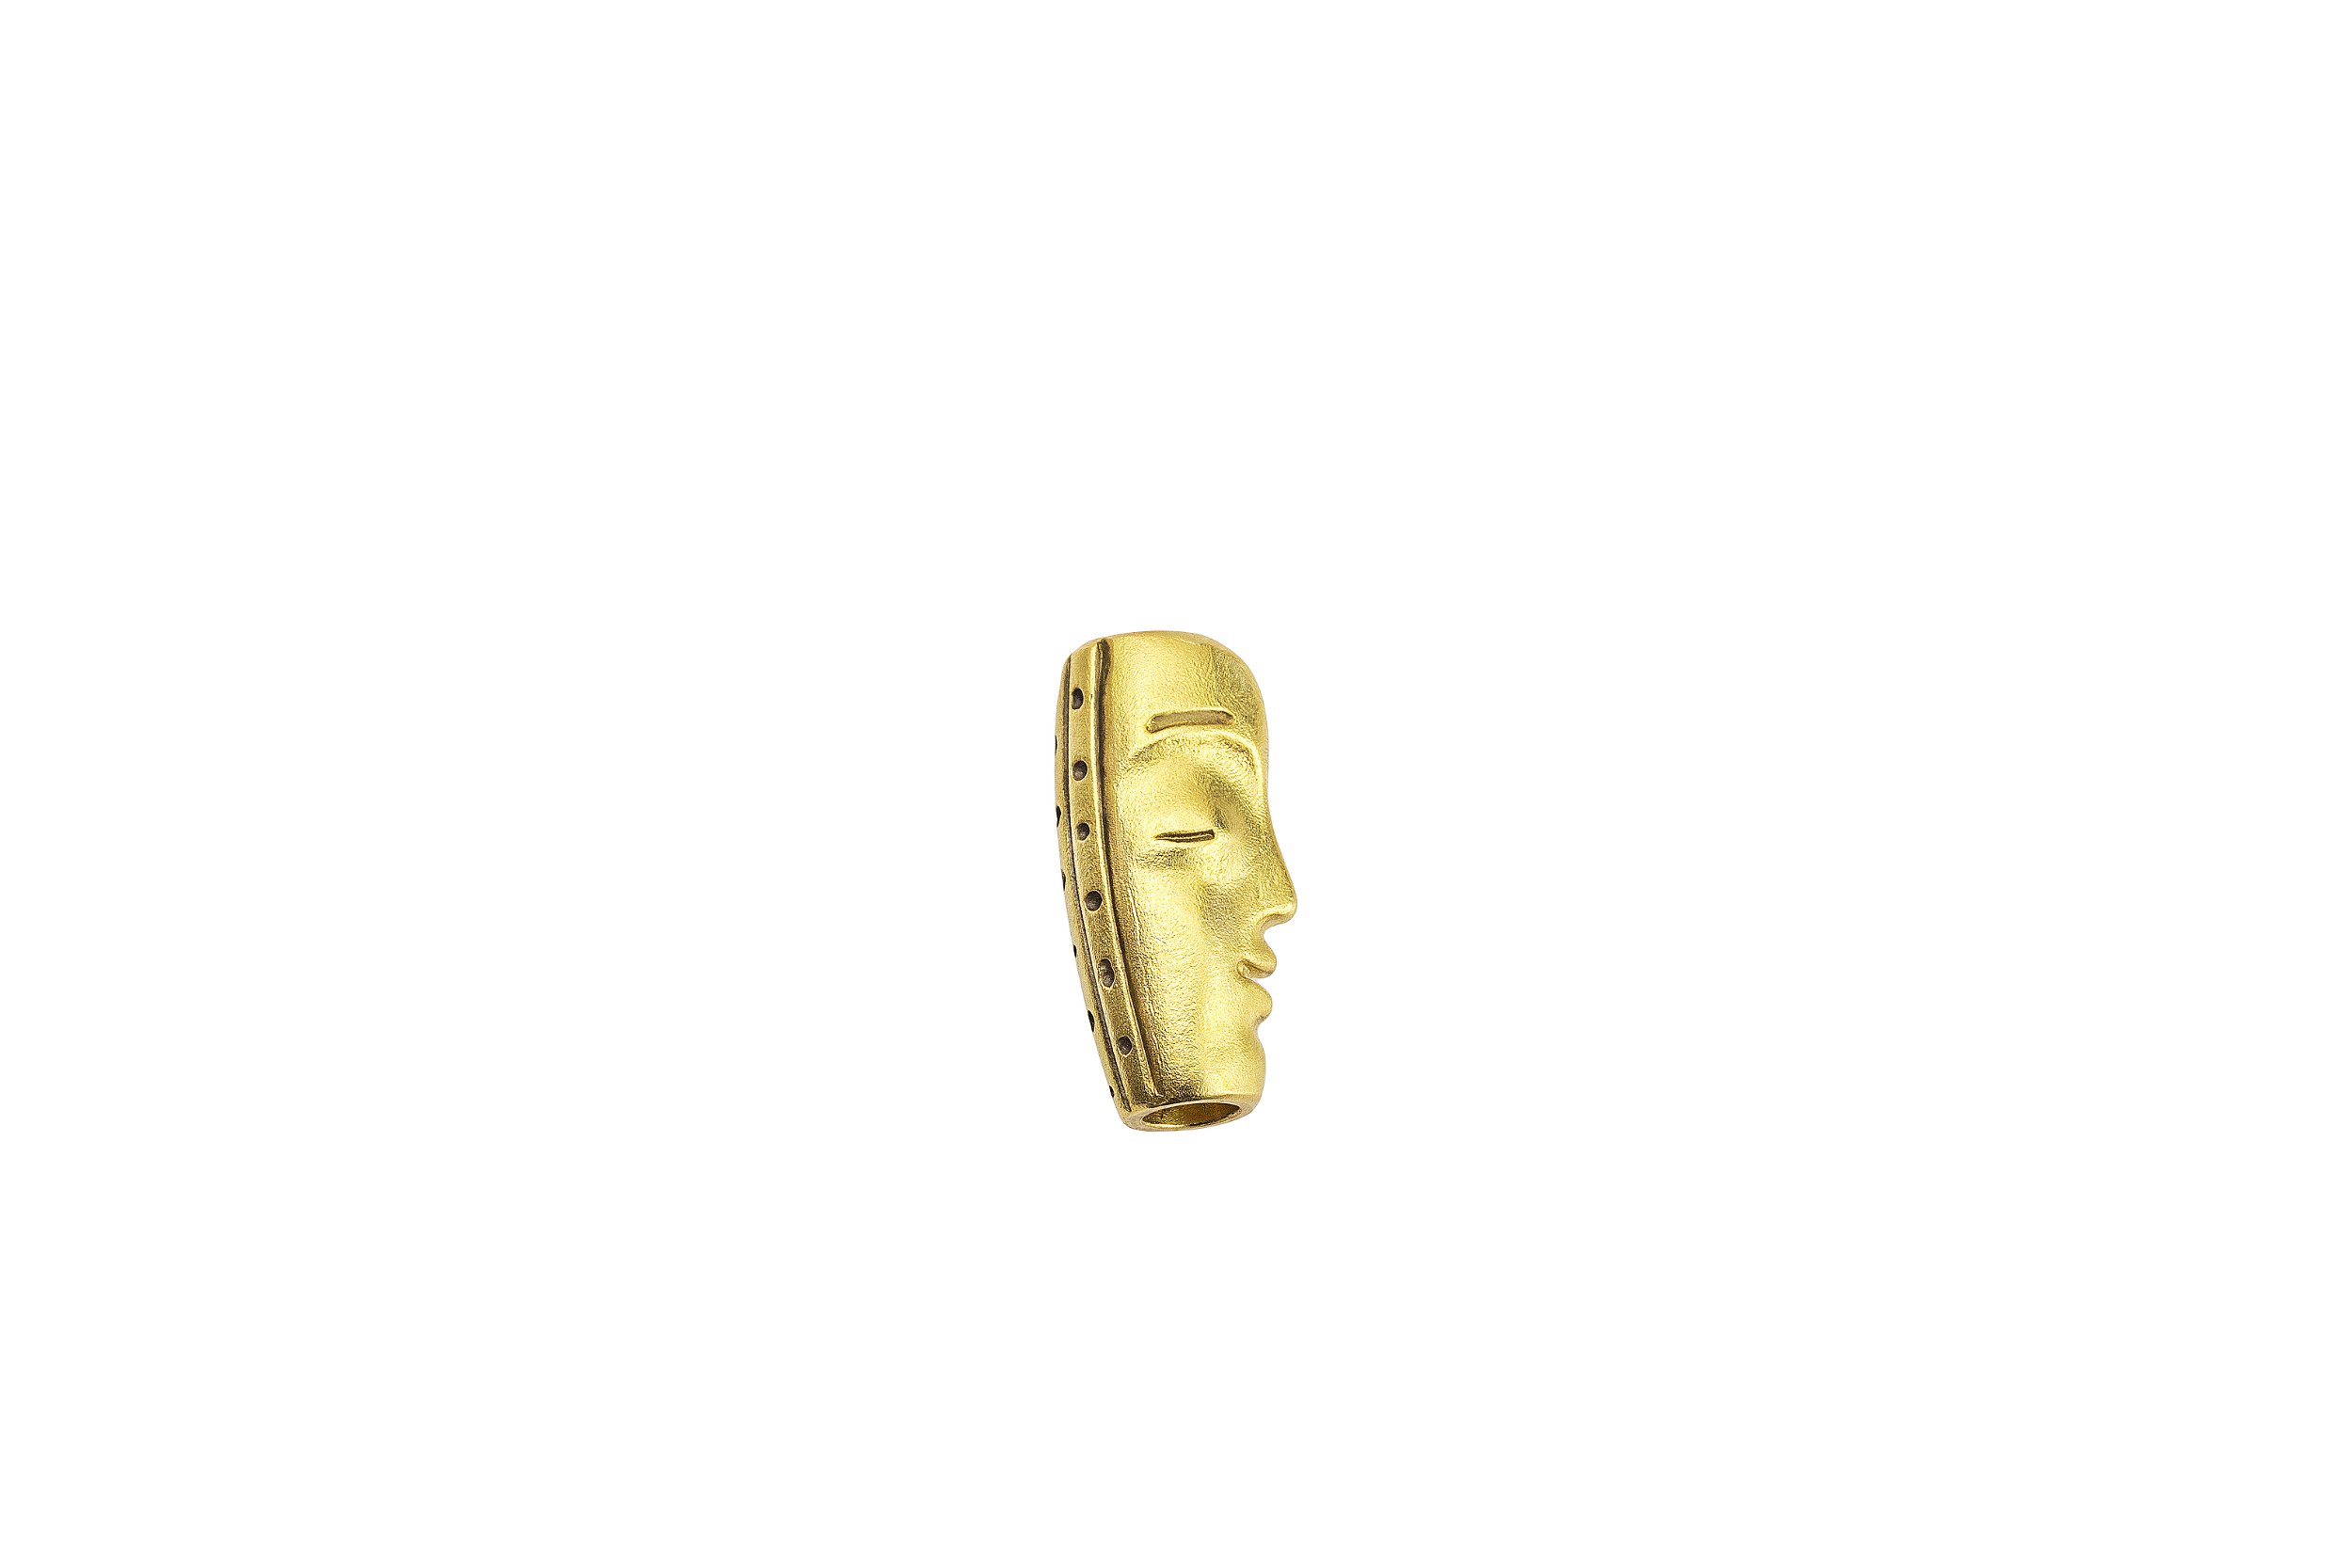 The Big Sleep Vario Clasp in 18kt Yellow Gold